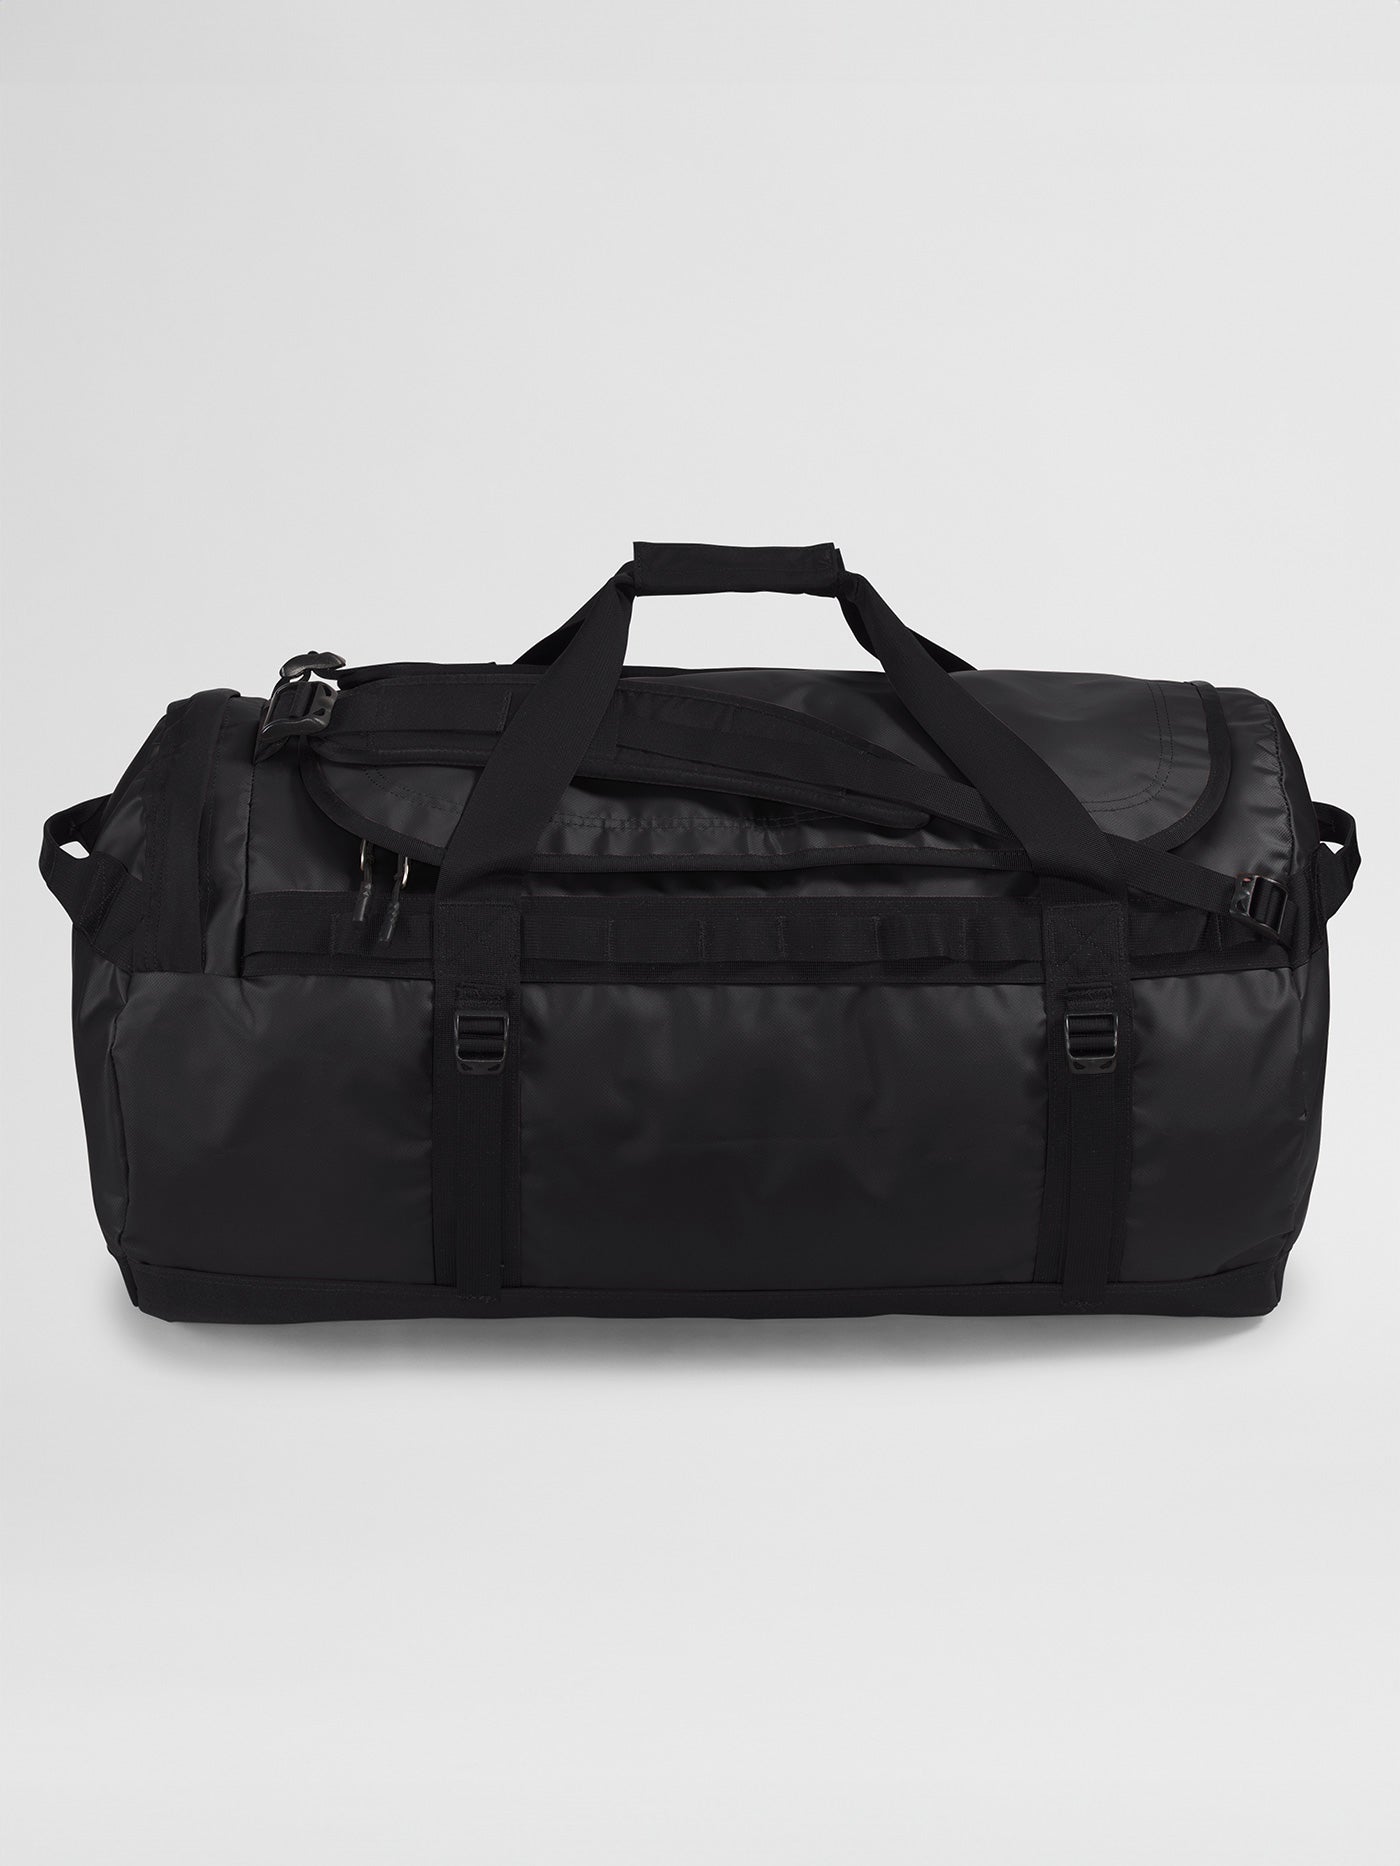 The North Face Base Camp Large Duffle Bag